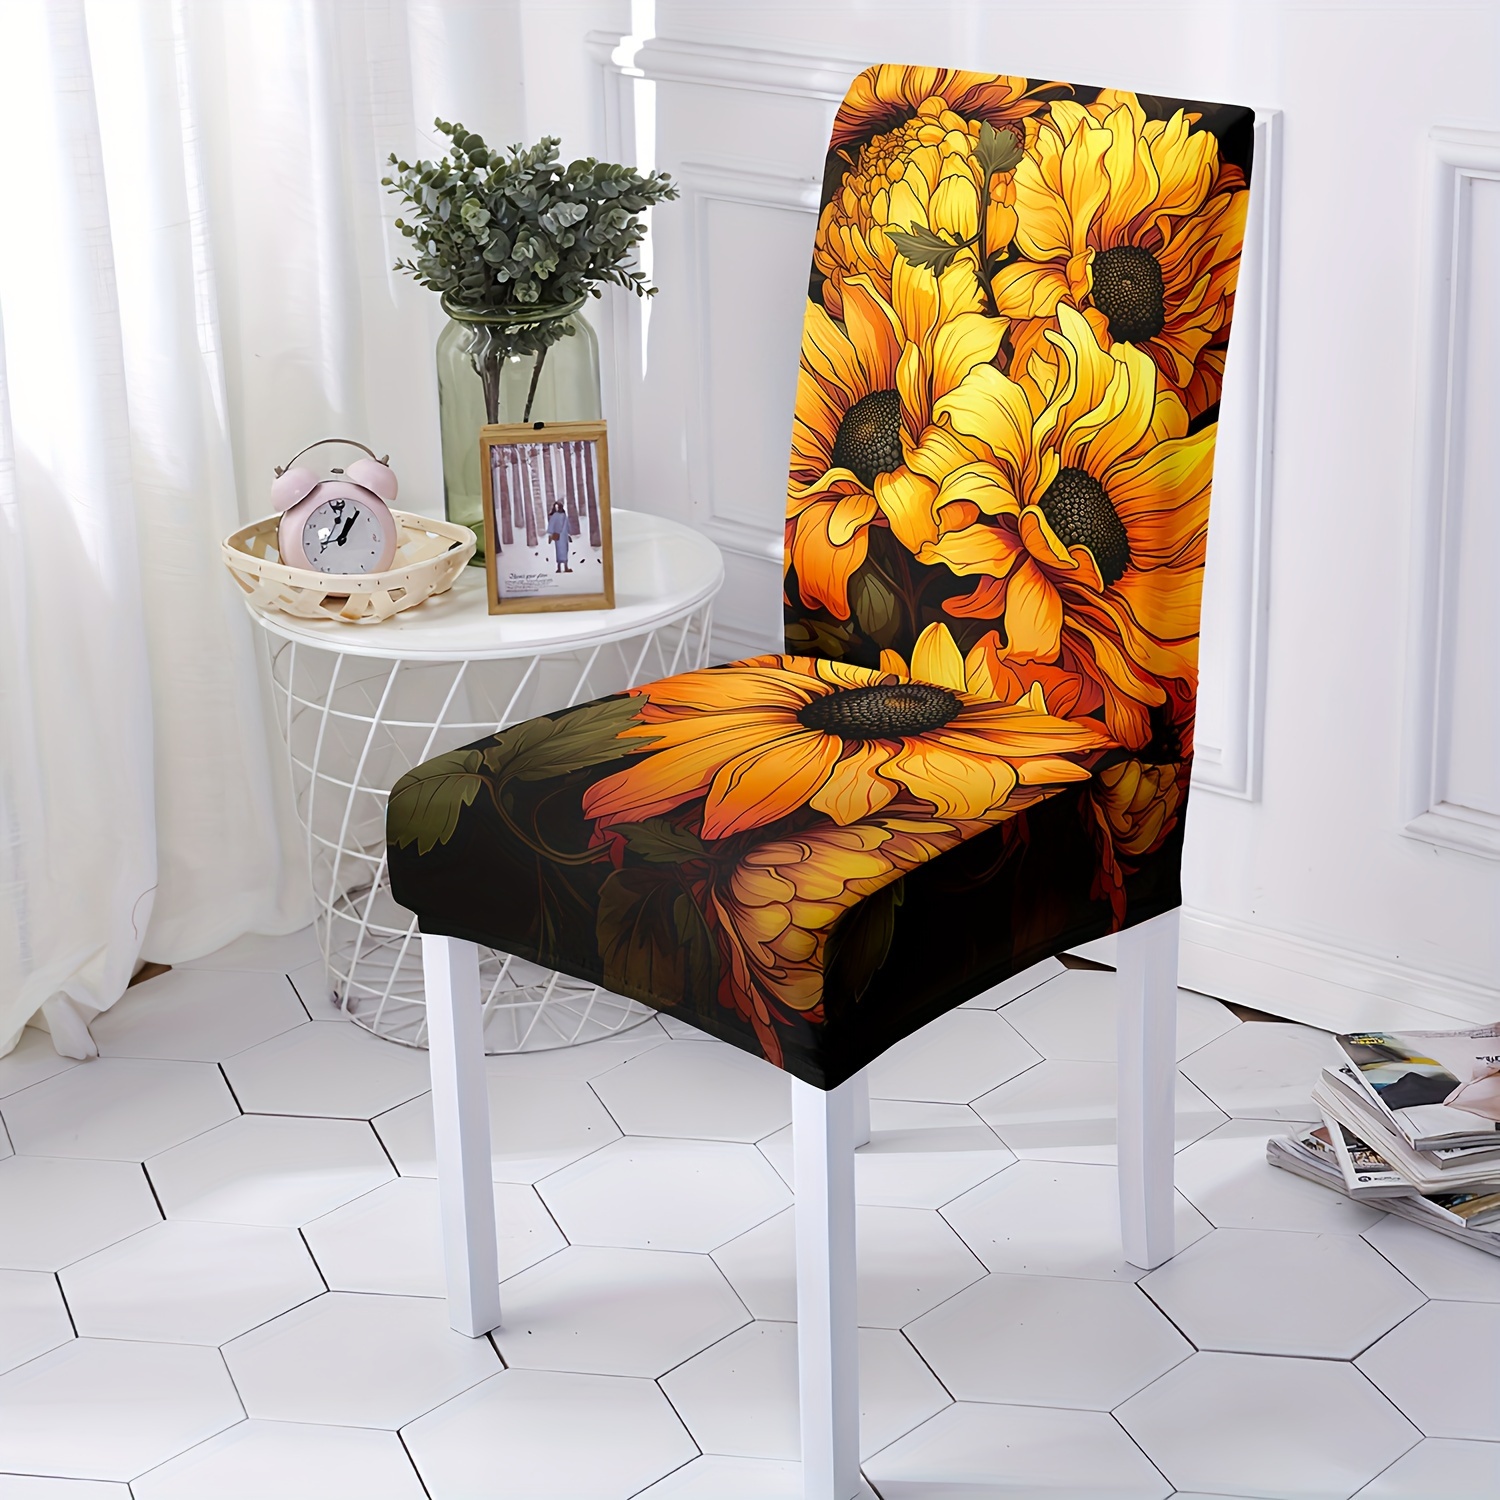 

Sunflower Print Elastic Chair Cover For Dining Room - 4/6pc Set, Classic Style, Machine Washable, 120-140g Milk Silk Fabric, Digital Print, Suitable For Restaurants, Hotels, Ceremonies, Festivals